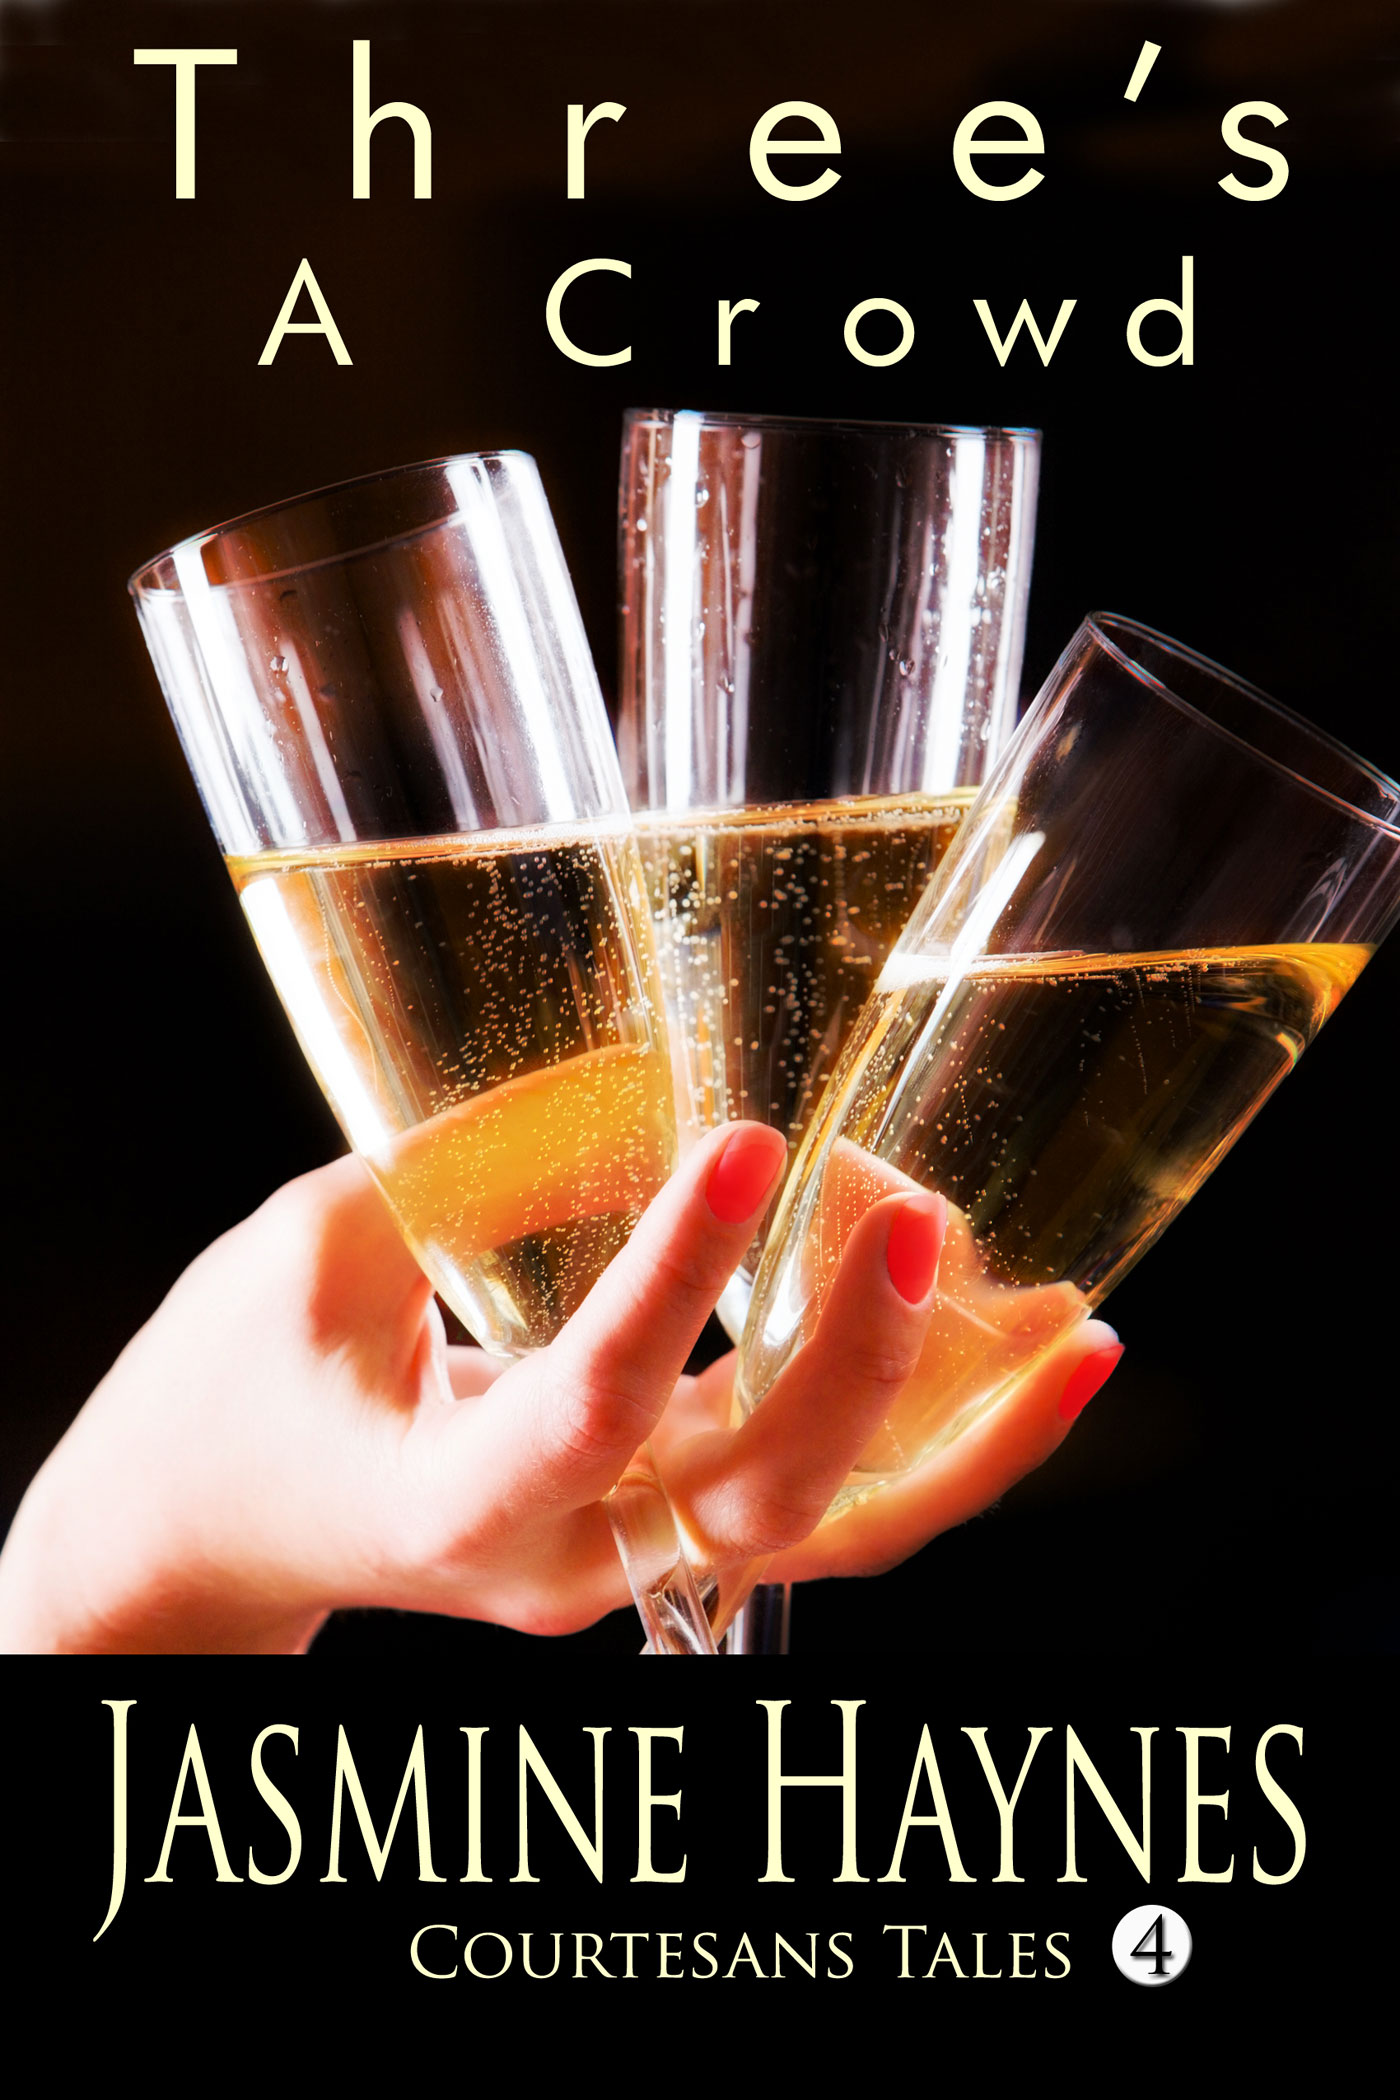 Cover of Three's a Crowd by Jasmine Haynes - Courtesans Tales 4